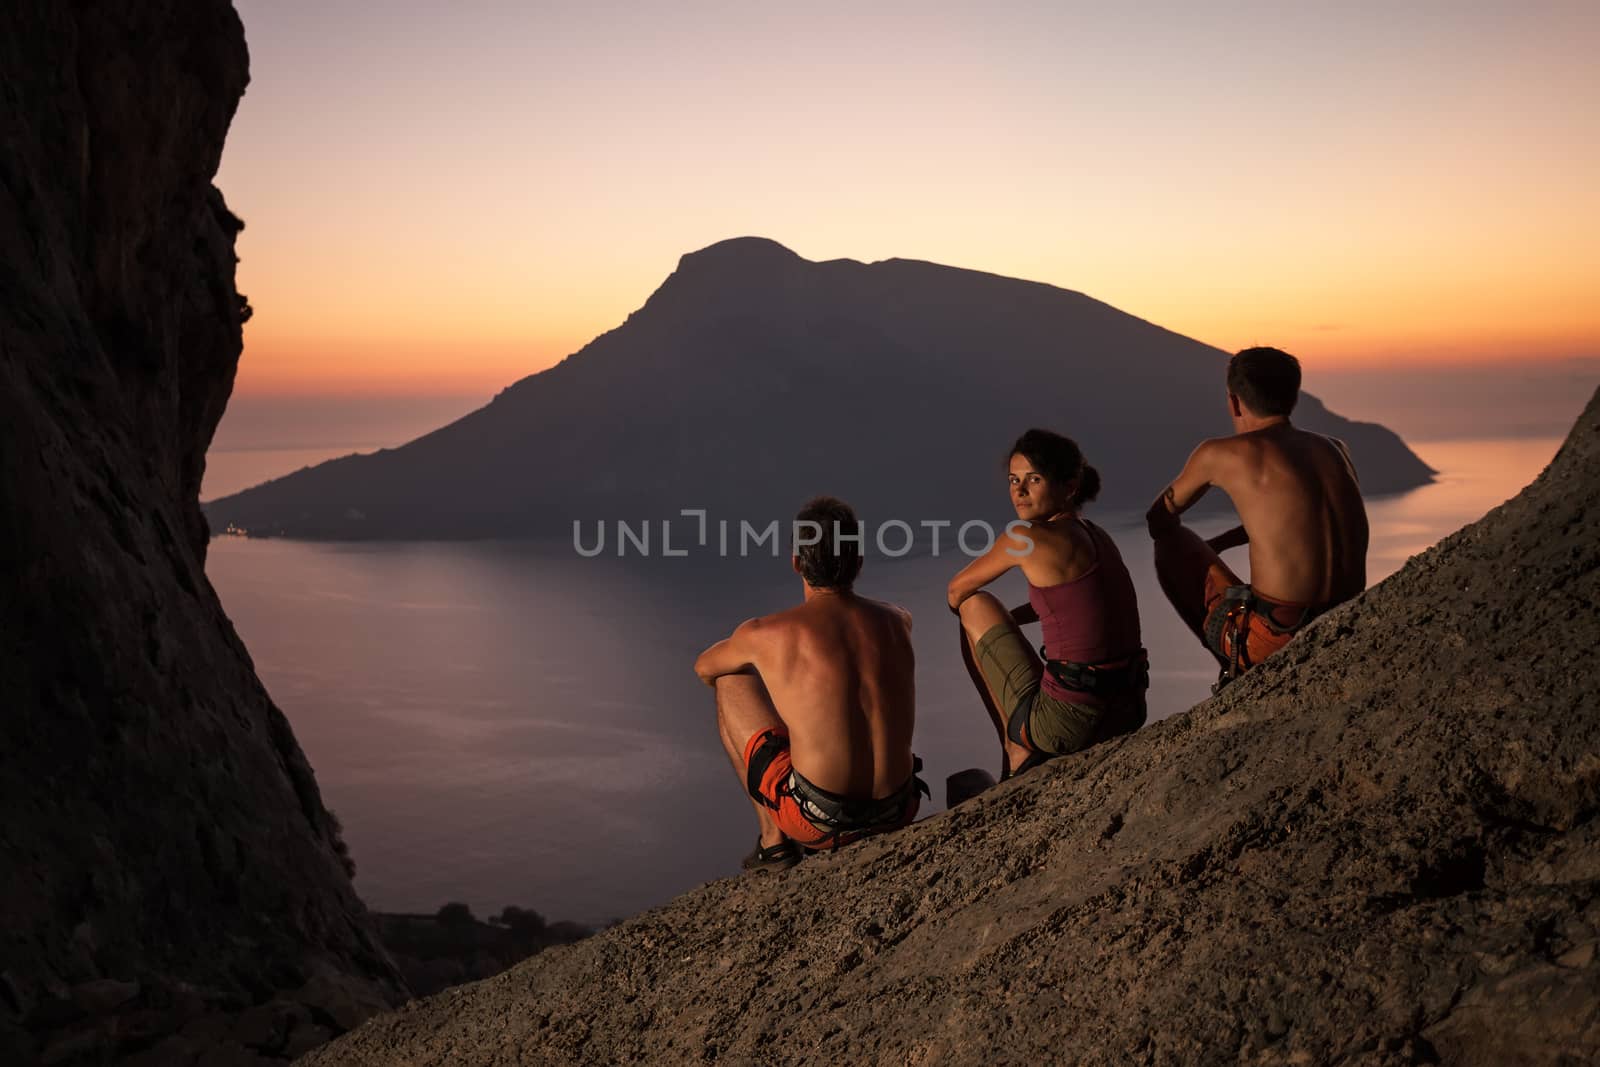 Three rock climbers having rest at sunset by photobac